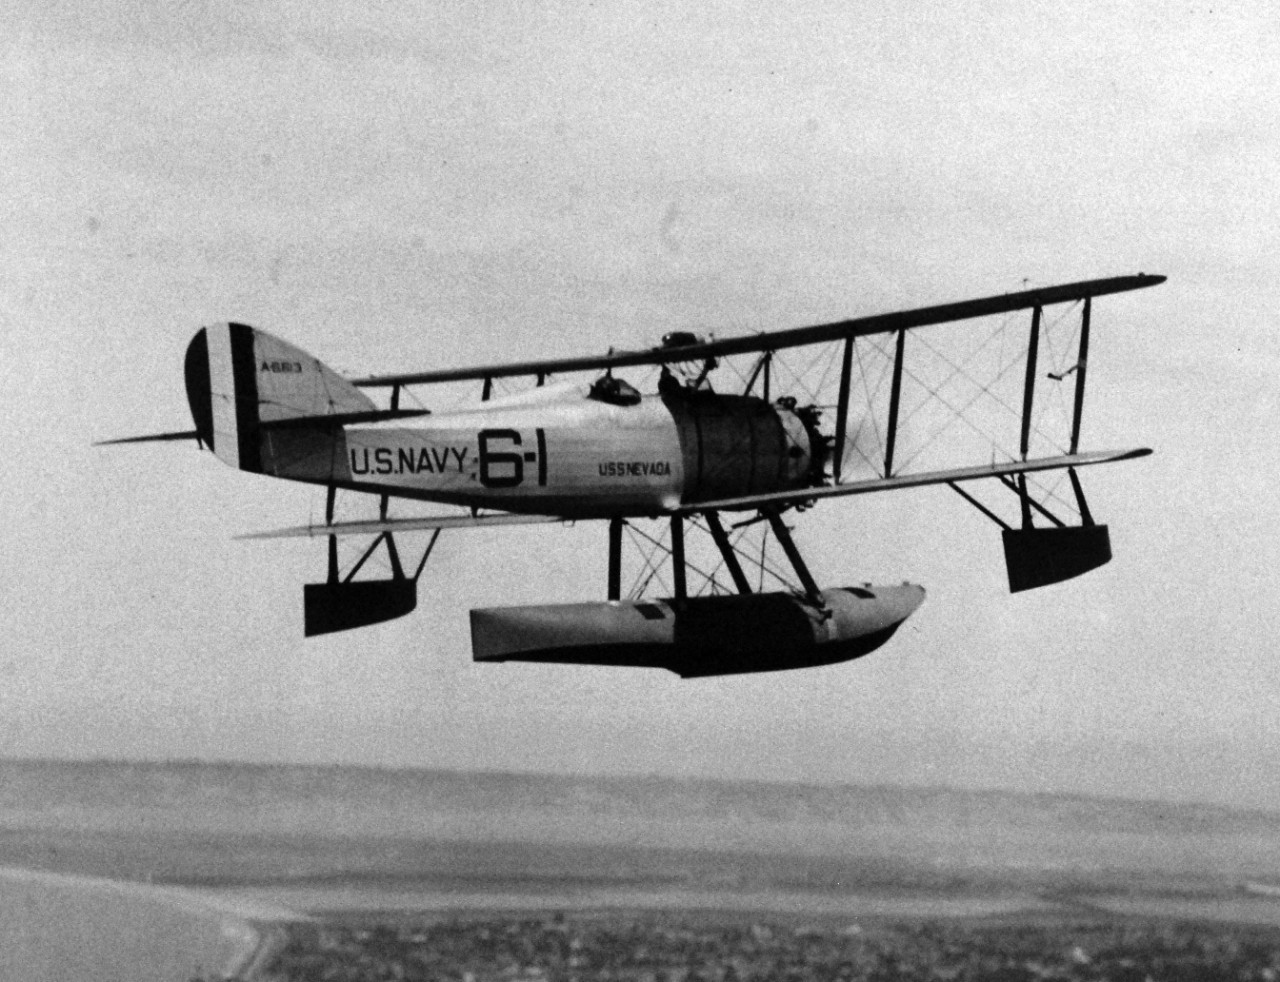 80-HAN-142-2:  Vought, UO aircraft, July 1927.   Plane was arriving from Naval Air Station, San Diego, California, July 8, 1927.  USS Nevada (BB-36) aircraft. U.S. Navy photograph, now in the collections of the National Archives. 